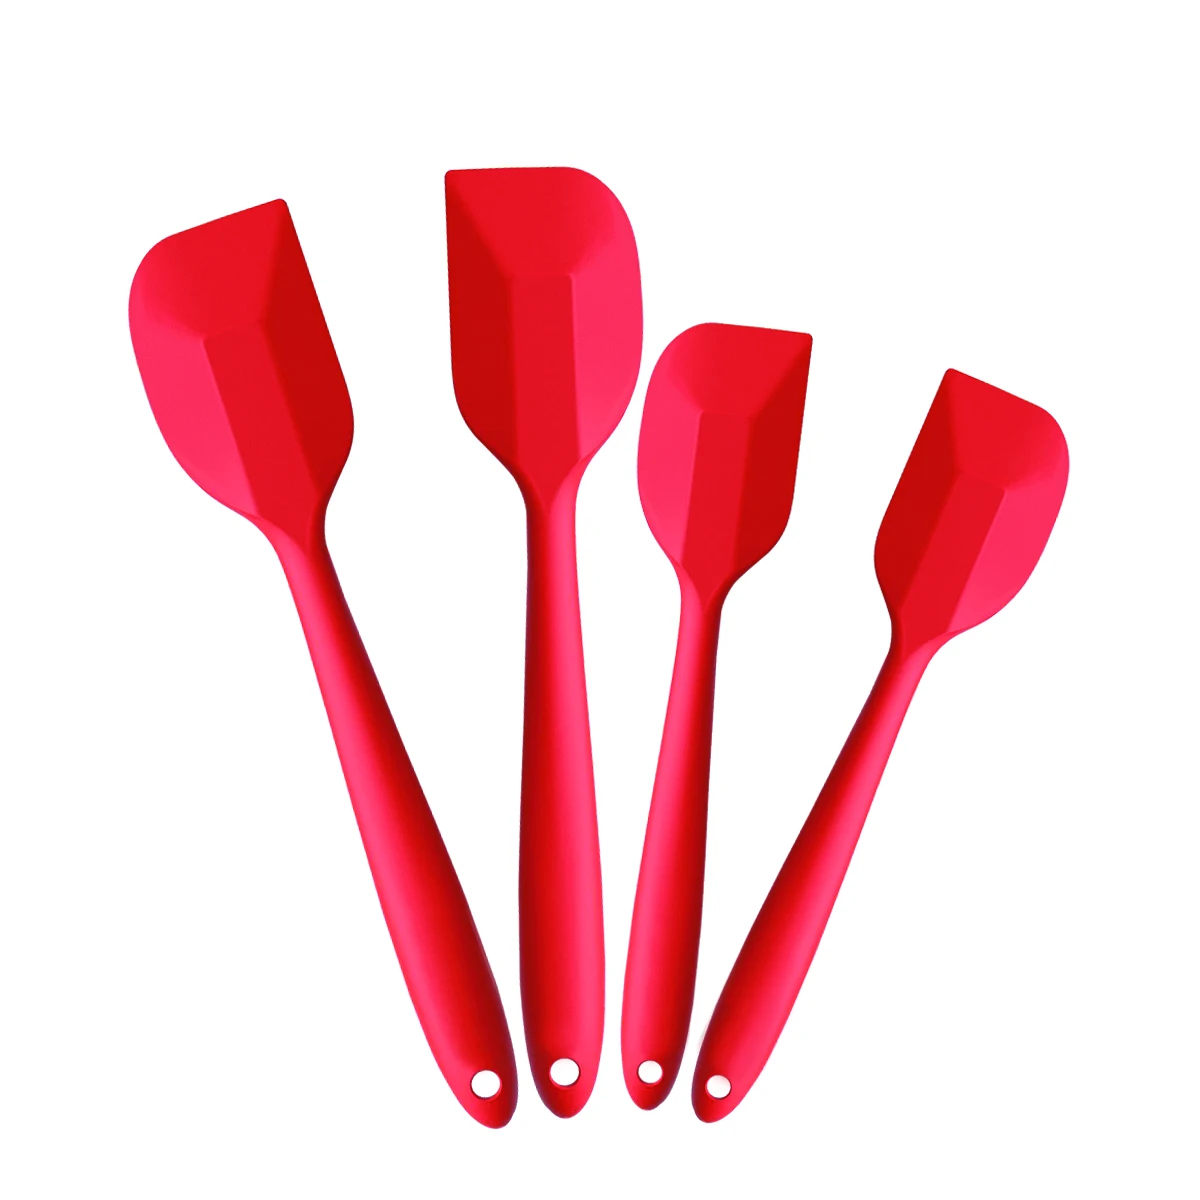 

Set of 4 Silicone Spatula Baking Tools Set for Non Stick Cooking Utensil set Heat Resistant Kitchen silicone Scraper, Red,black, green or custom color